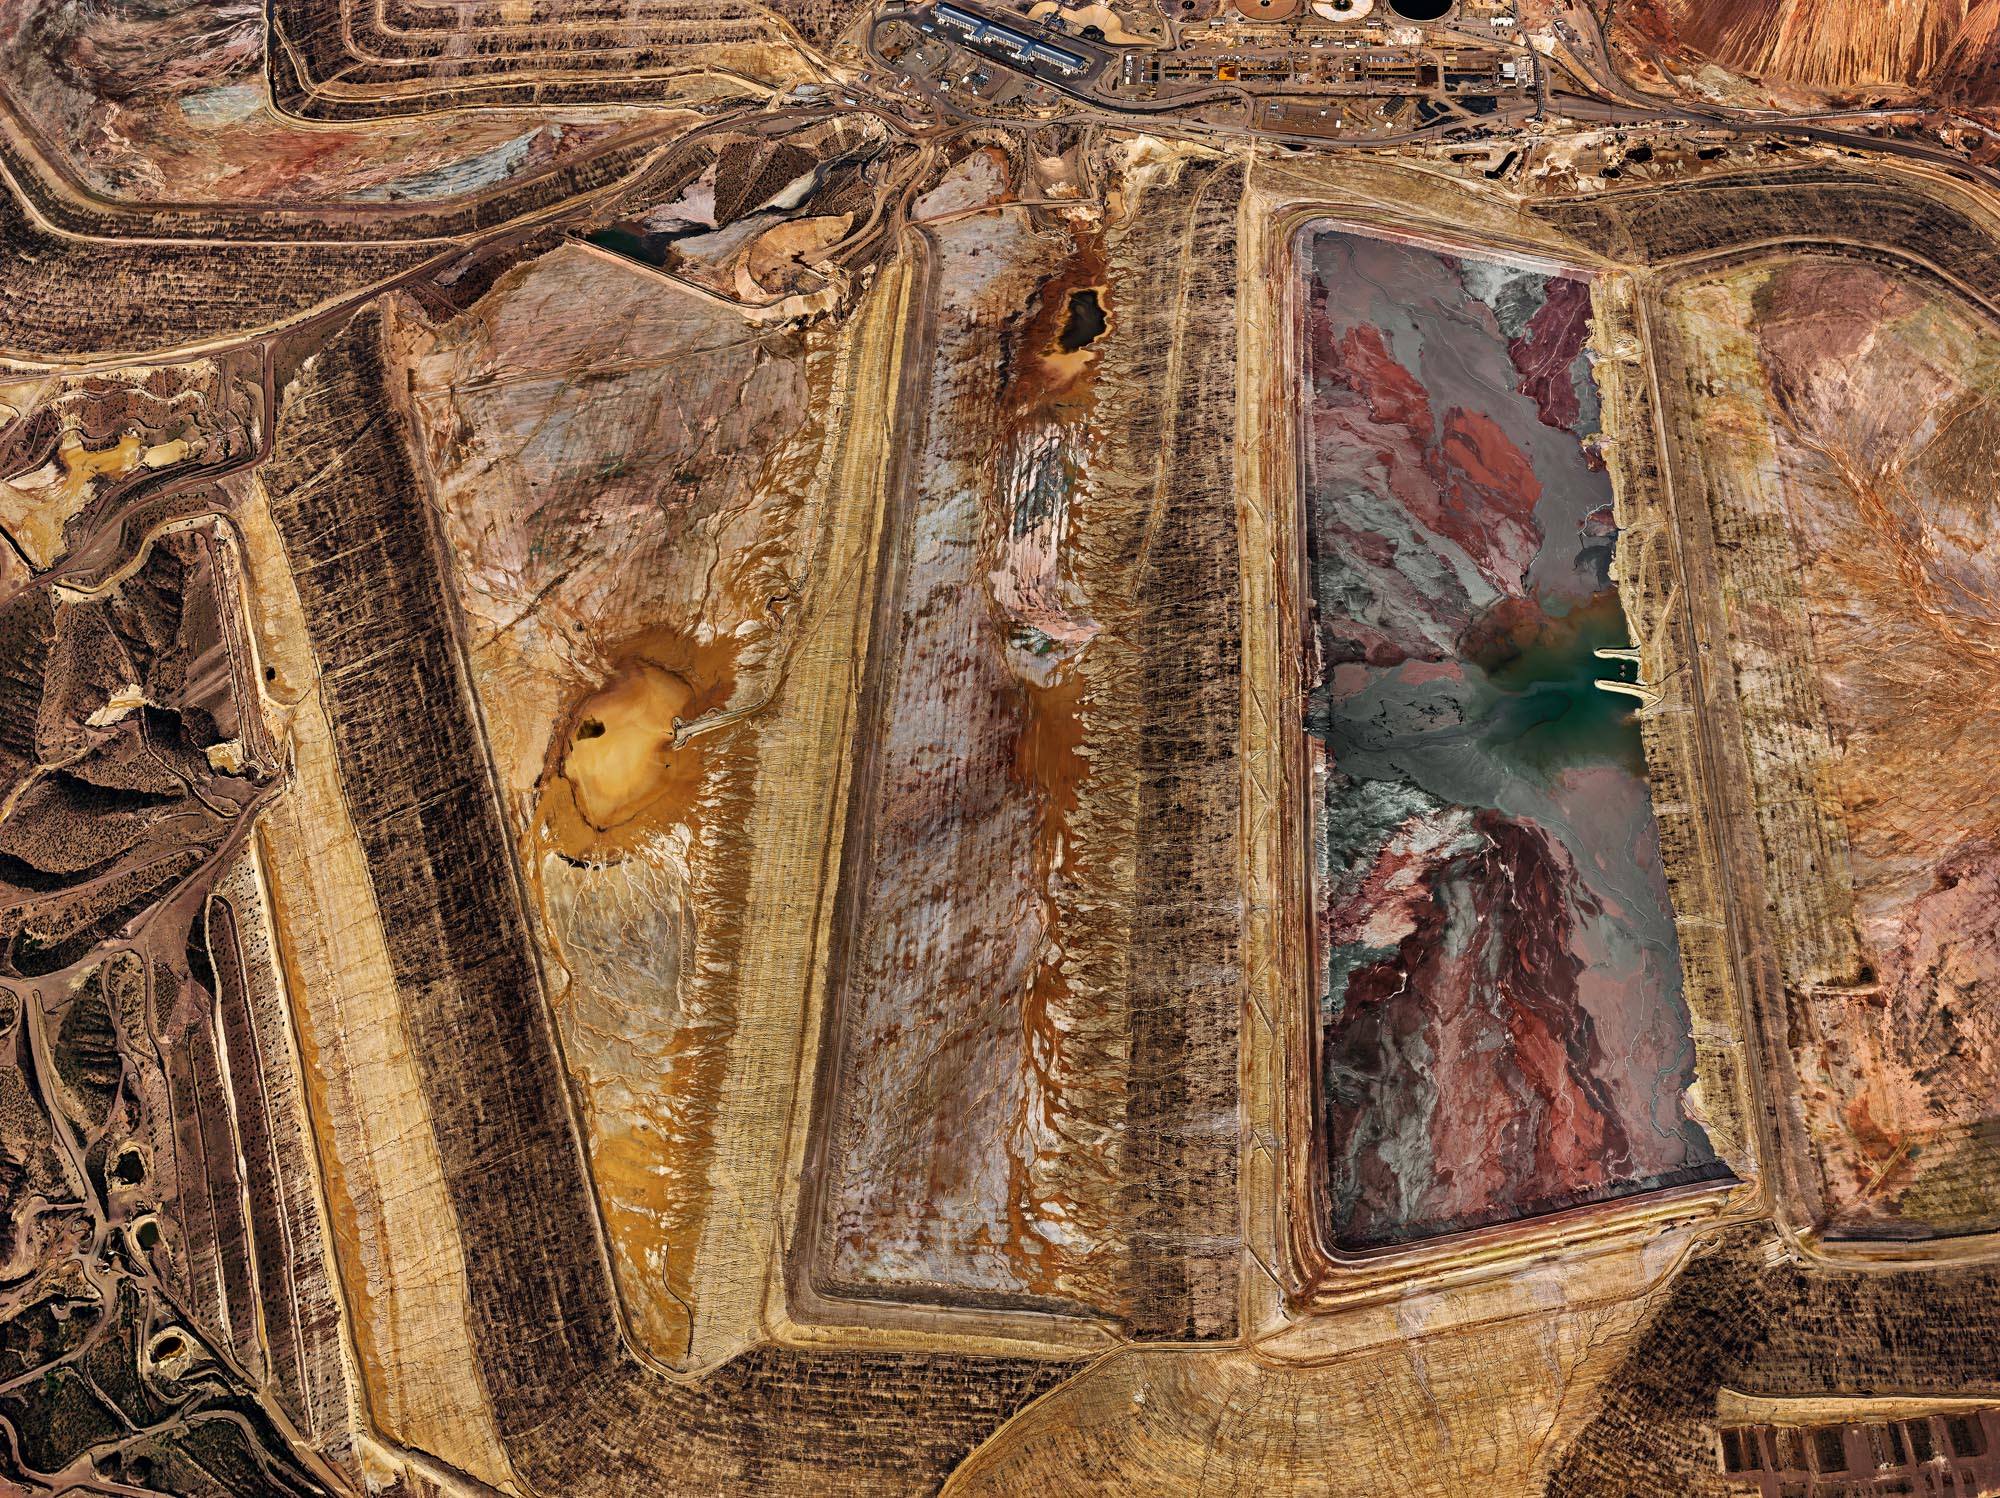 Morenci Mine #2, Clifton, Arizona, USA, 2012. Burtynsky made this photograph, alongside another one, specially available for certain people who donated to the Red Cross.  (Photograph provided by Edward Burtynsky)